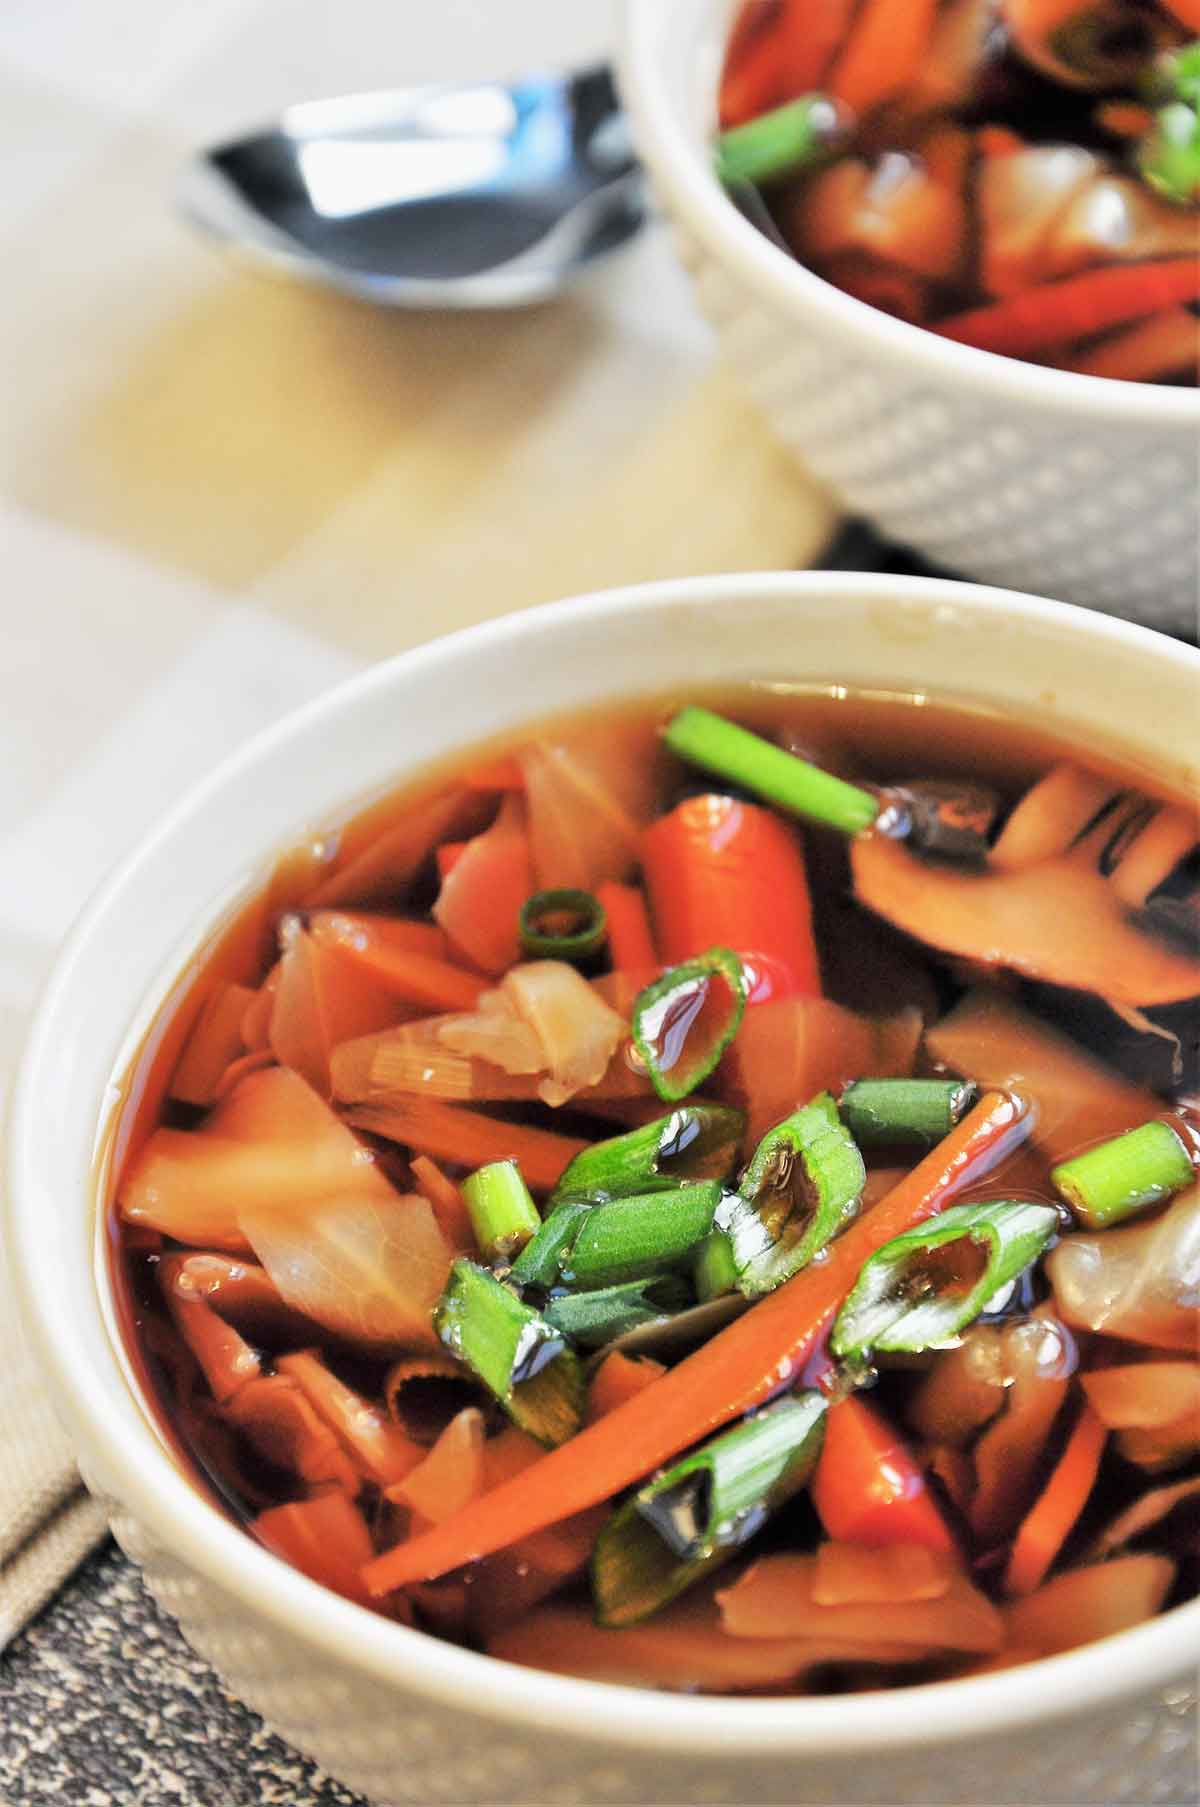 Hot and sour soup served in a bowl.